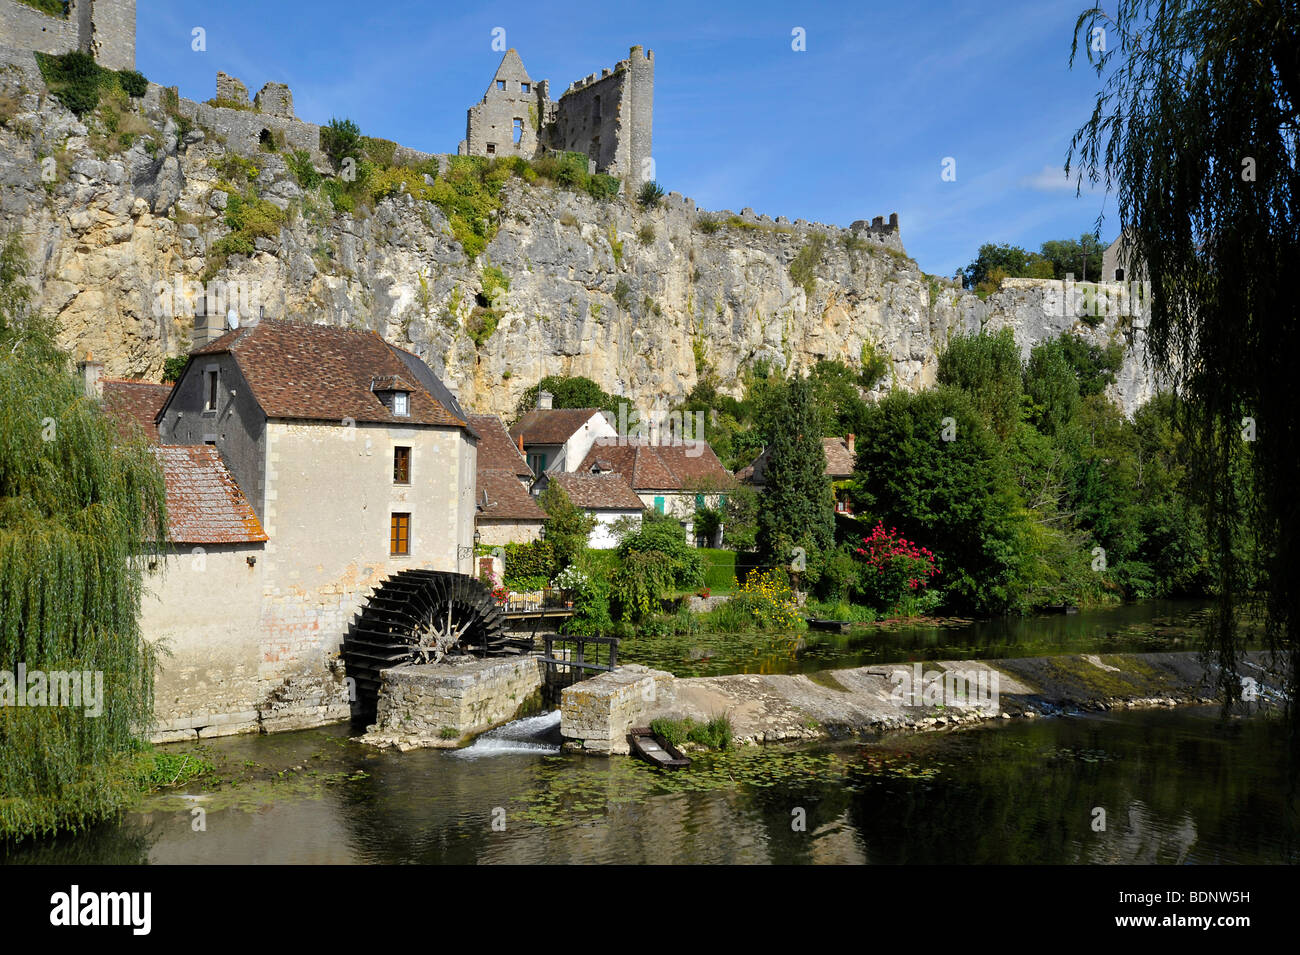 Tranquil river scene and watermill in the town of Angles sur l' Anglin, France Stock Photo